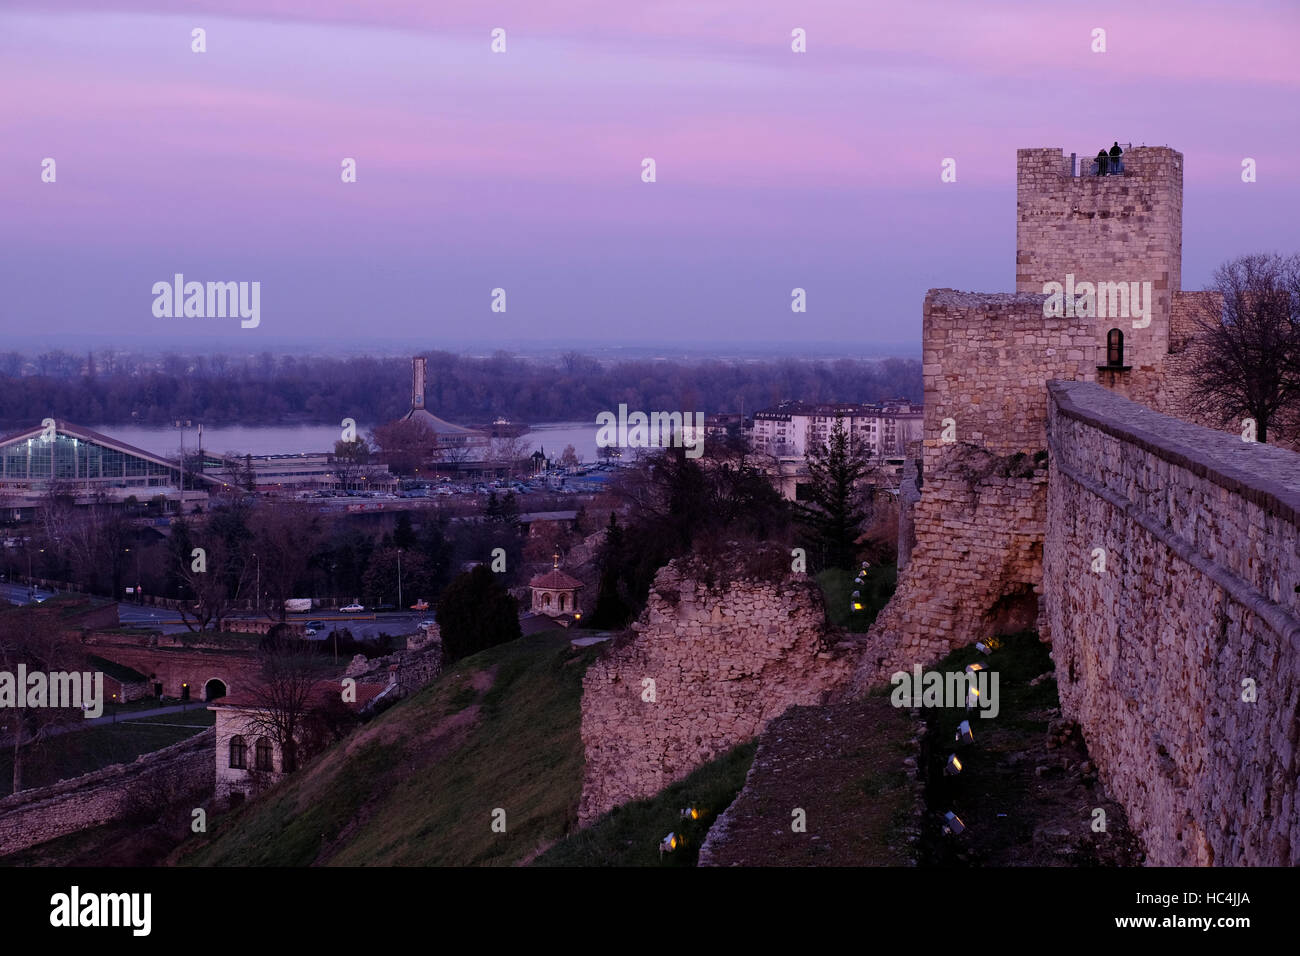 View at sunset of the Despot Stefan or Dizdar Tower located in the Kalemegdan fortress in the city of Belgrade capital of the Republic of Serbia Stock Photo